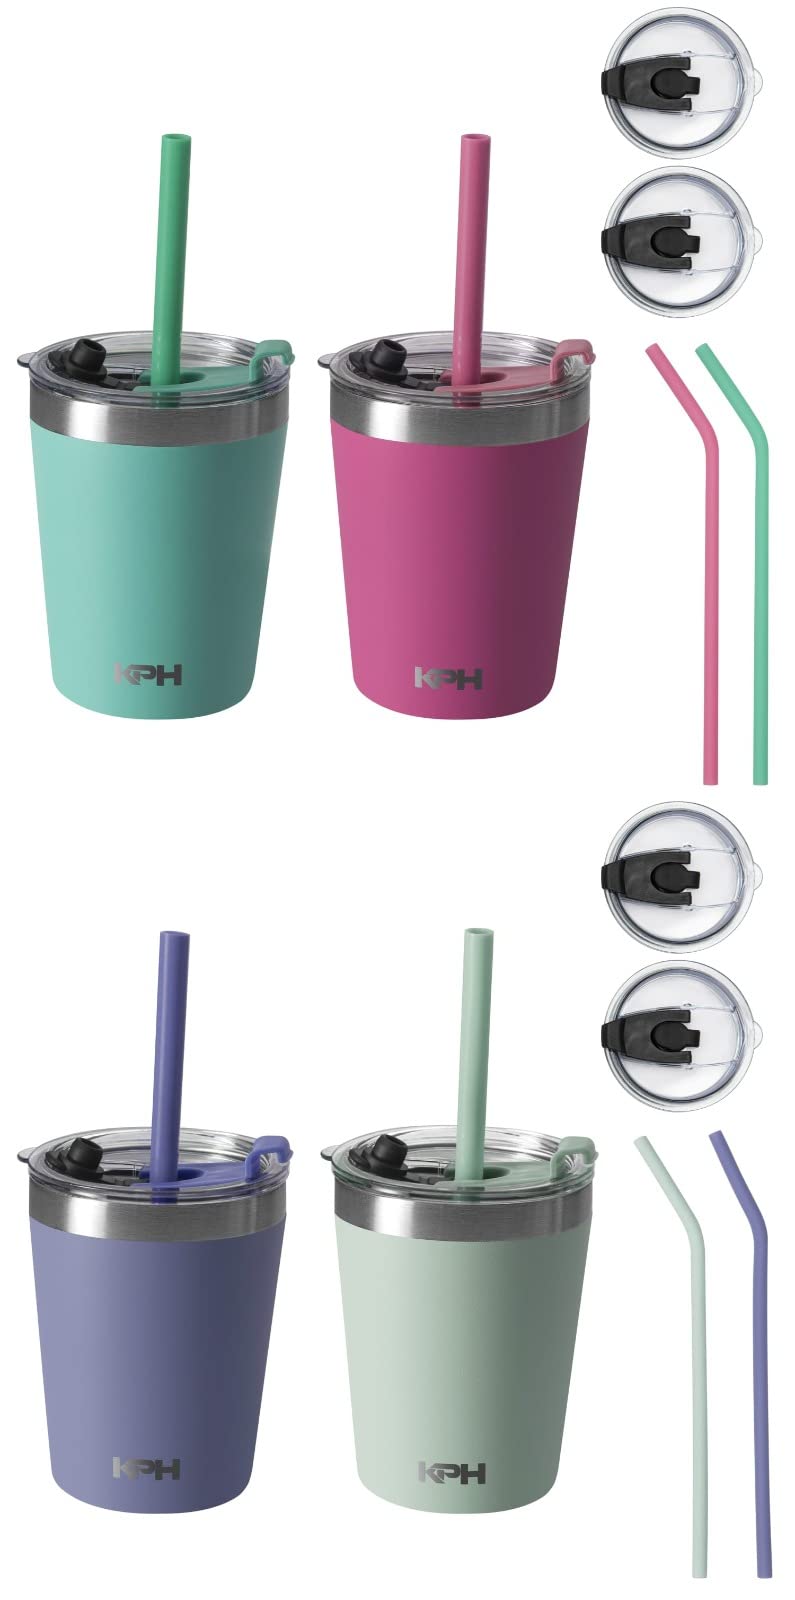 CUPKIN Stackable Stainless Steel Kids Cups - Set of (2) 8 oz